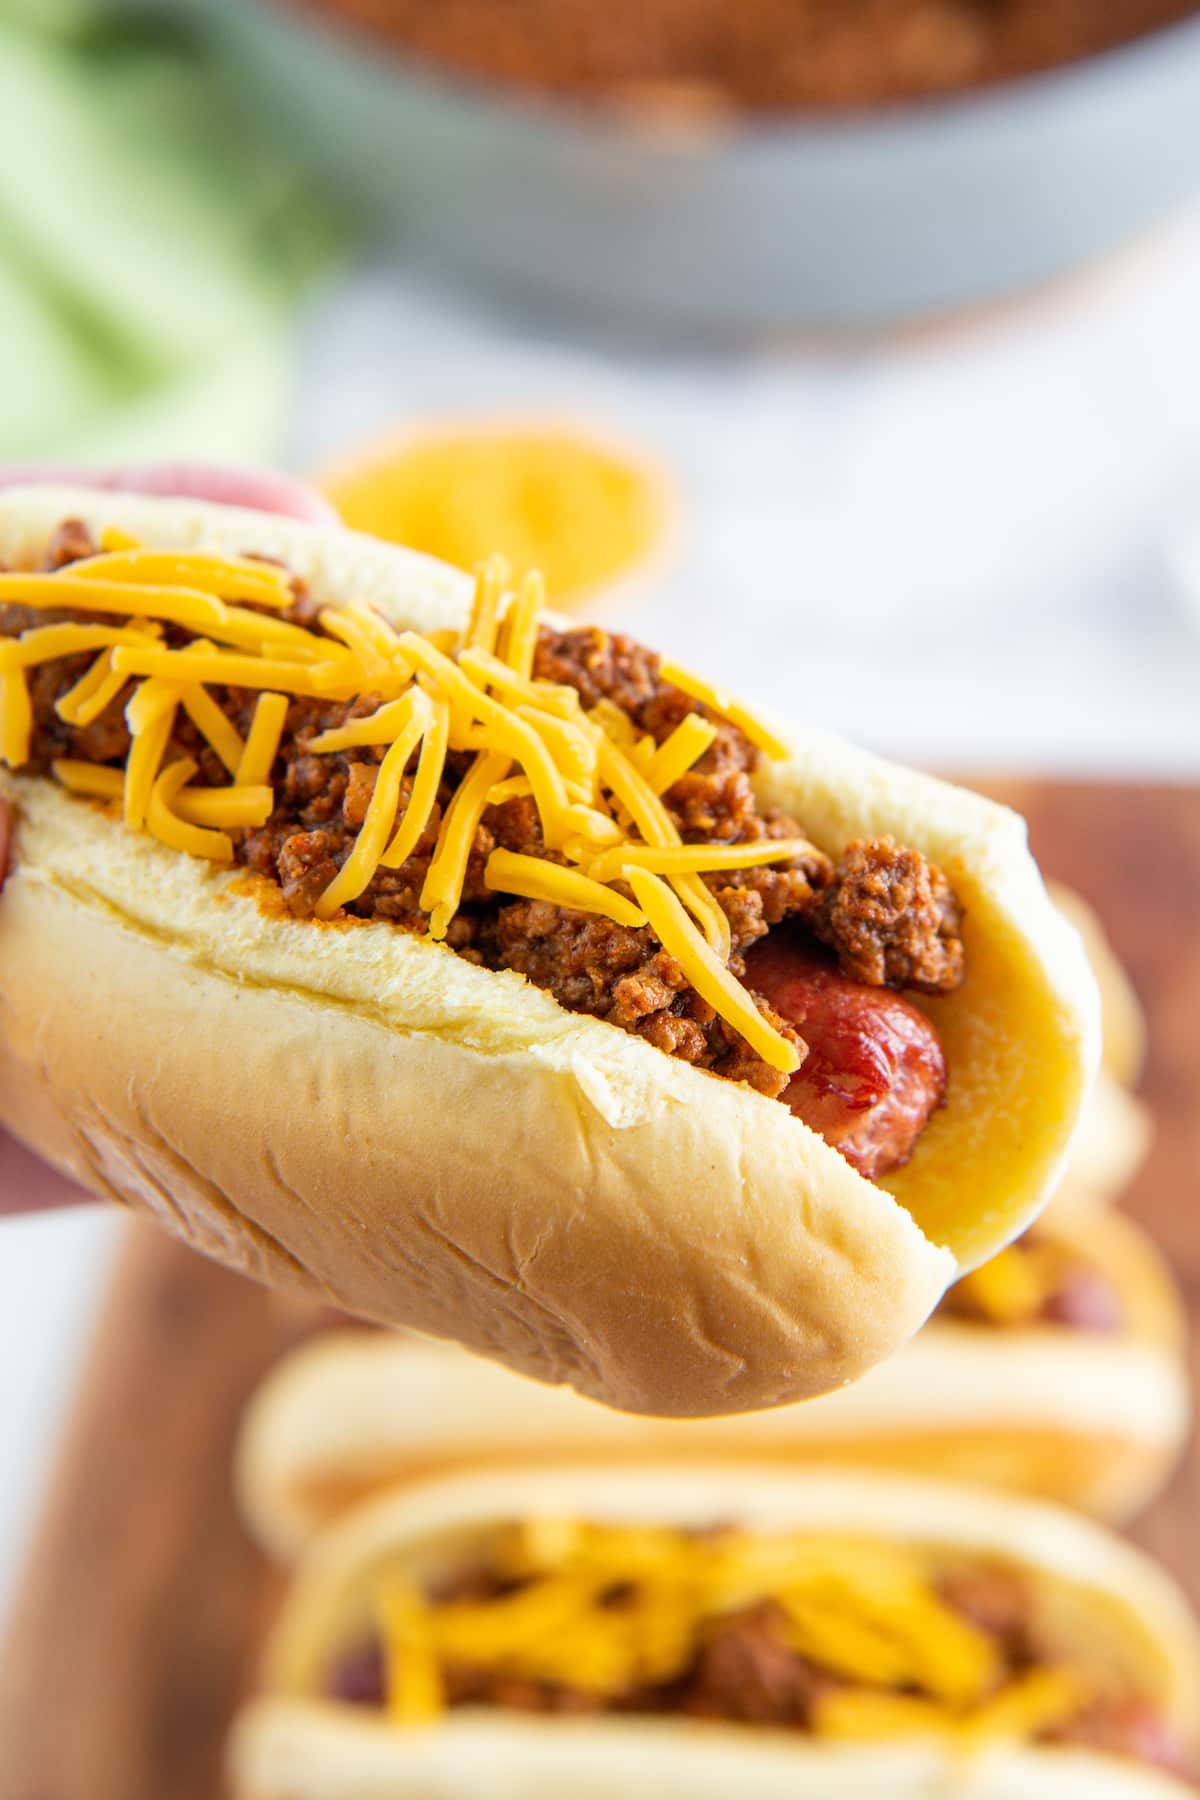 A hot dog being held with hot dog chili and cheese on top.